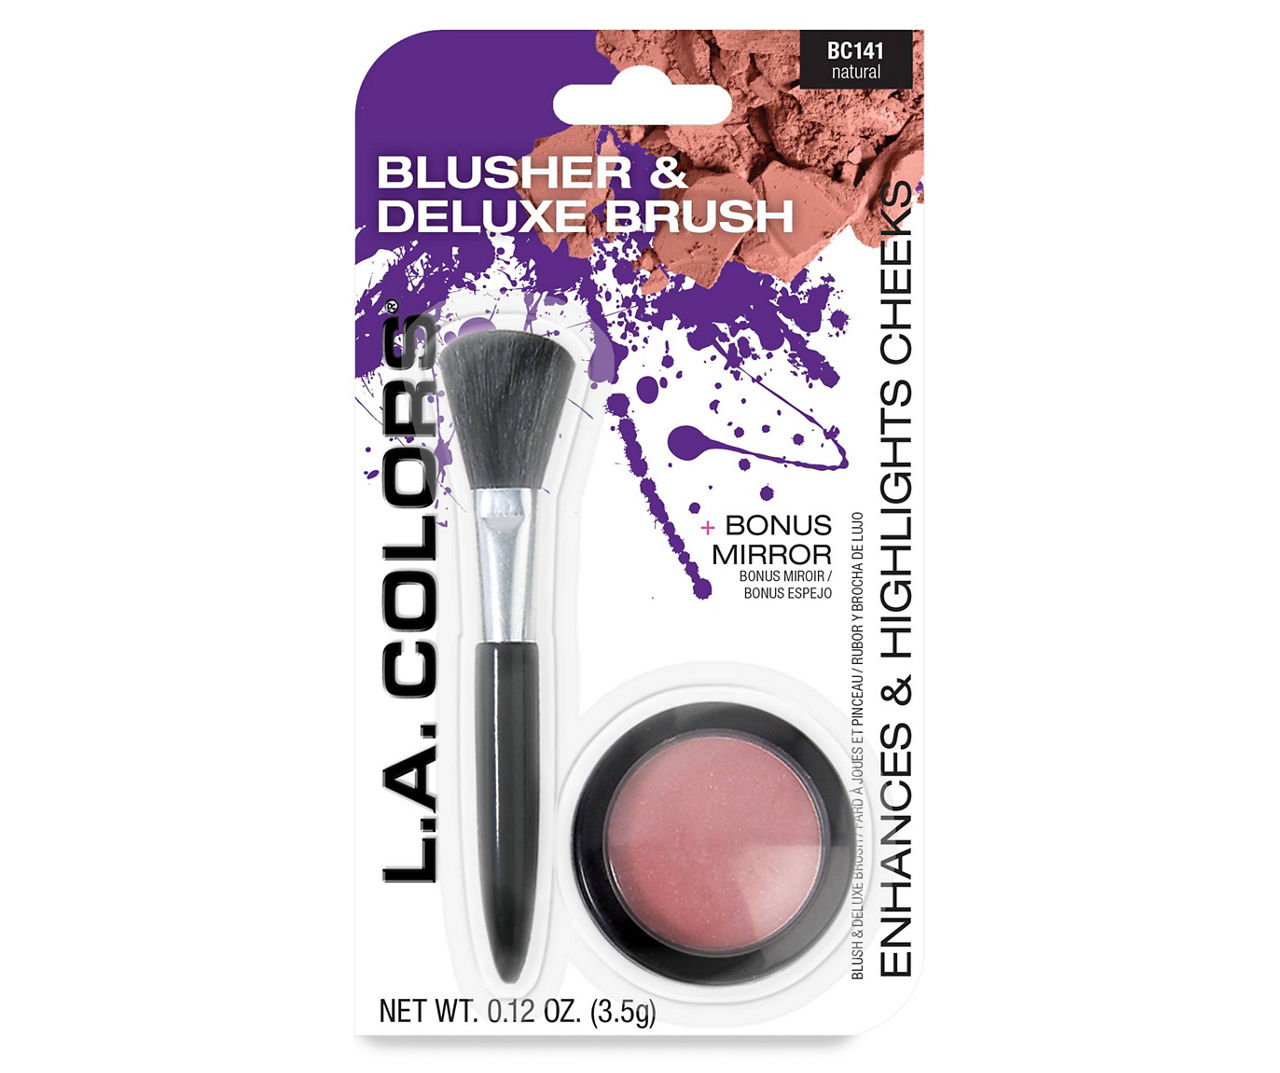 Blusher & Deluxe Brush in Natural